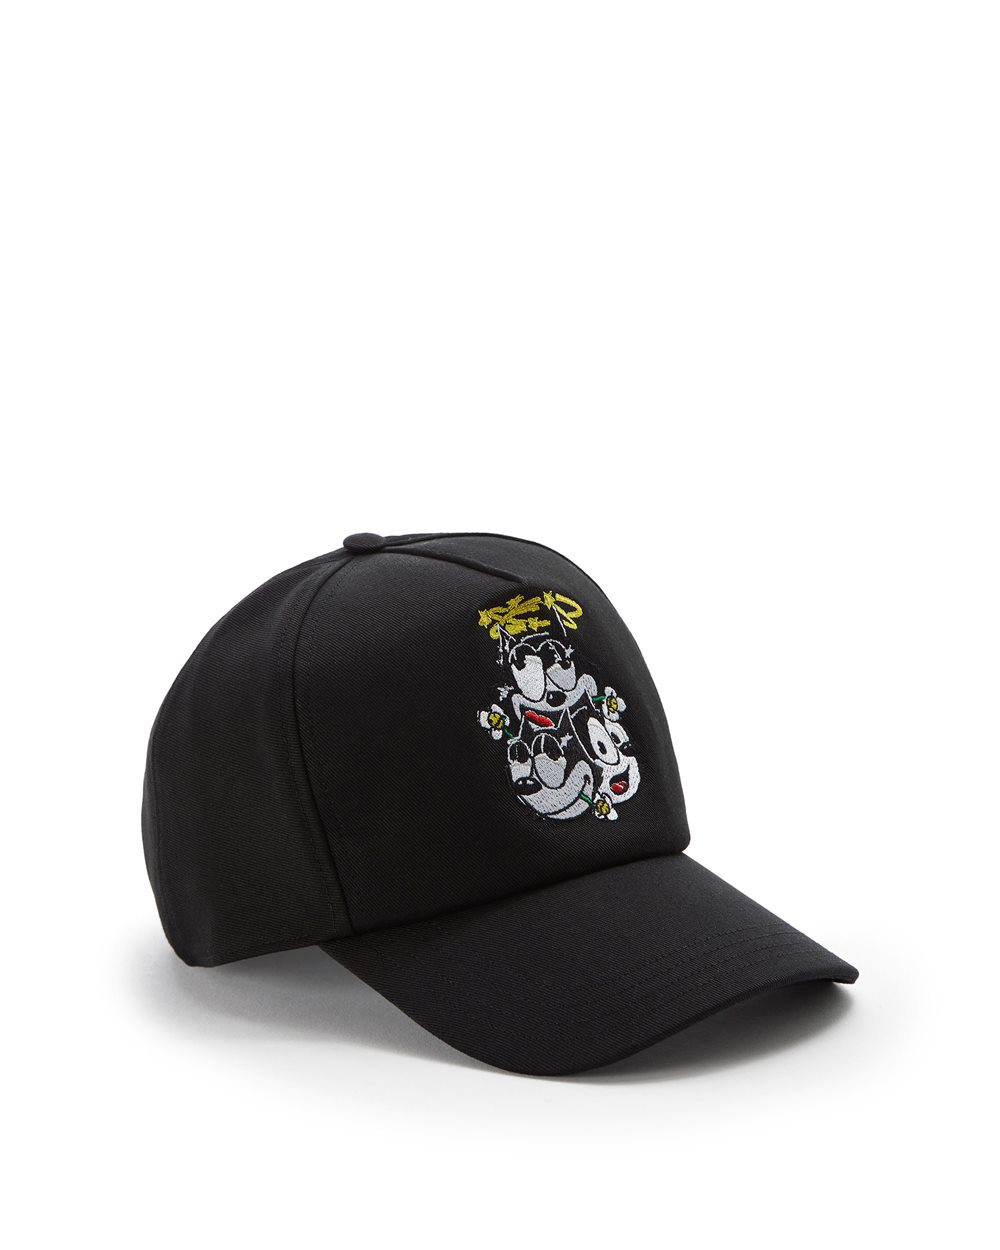 Baseball hat with cartoon graphics and logo - VALENTINE'S DAY GIFTS | Iceberg - Official Website